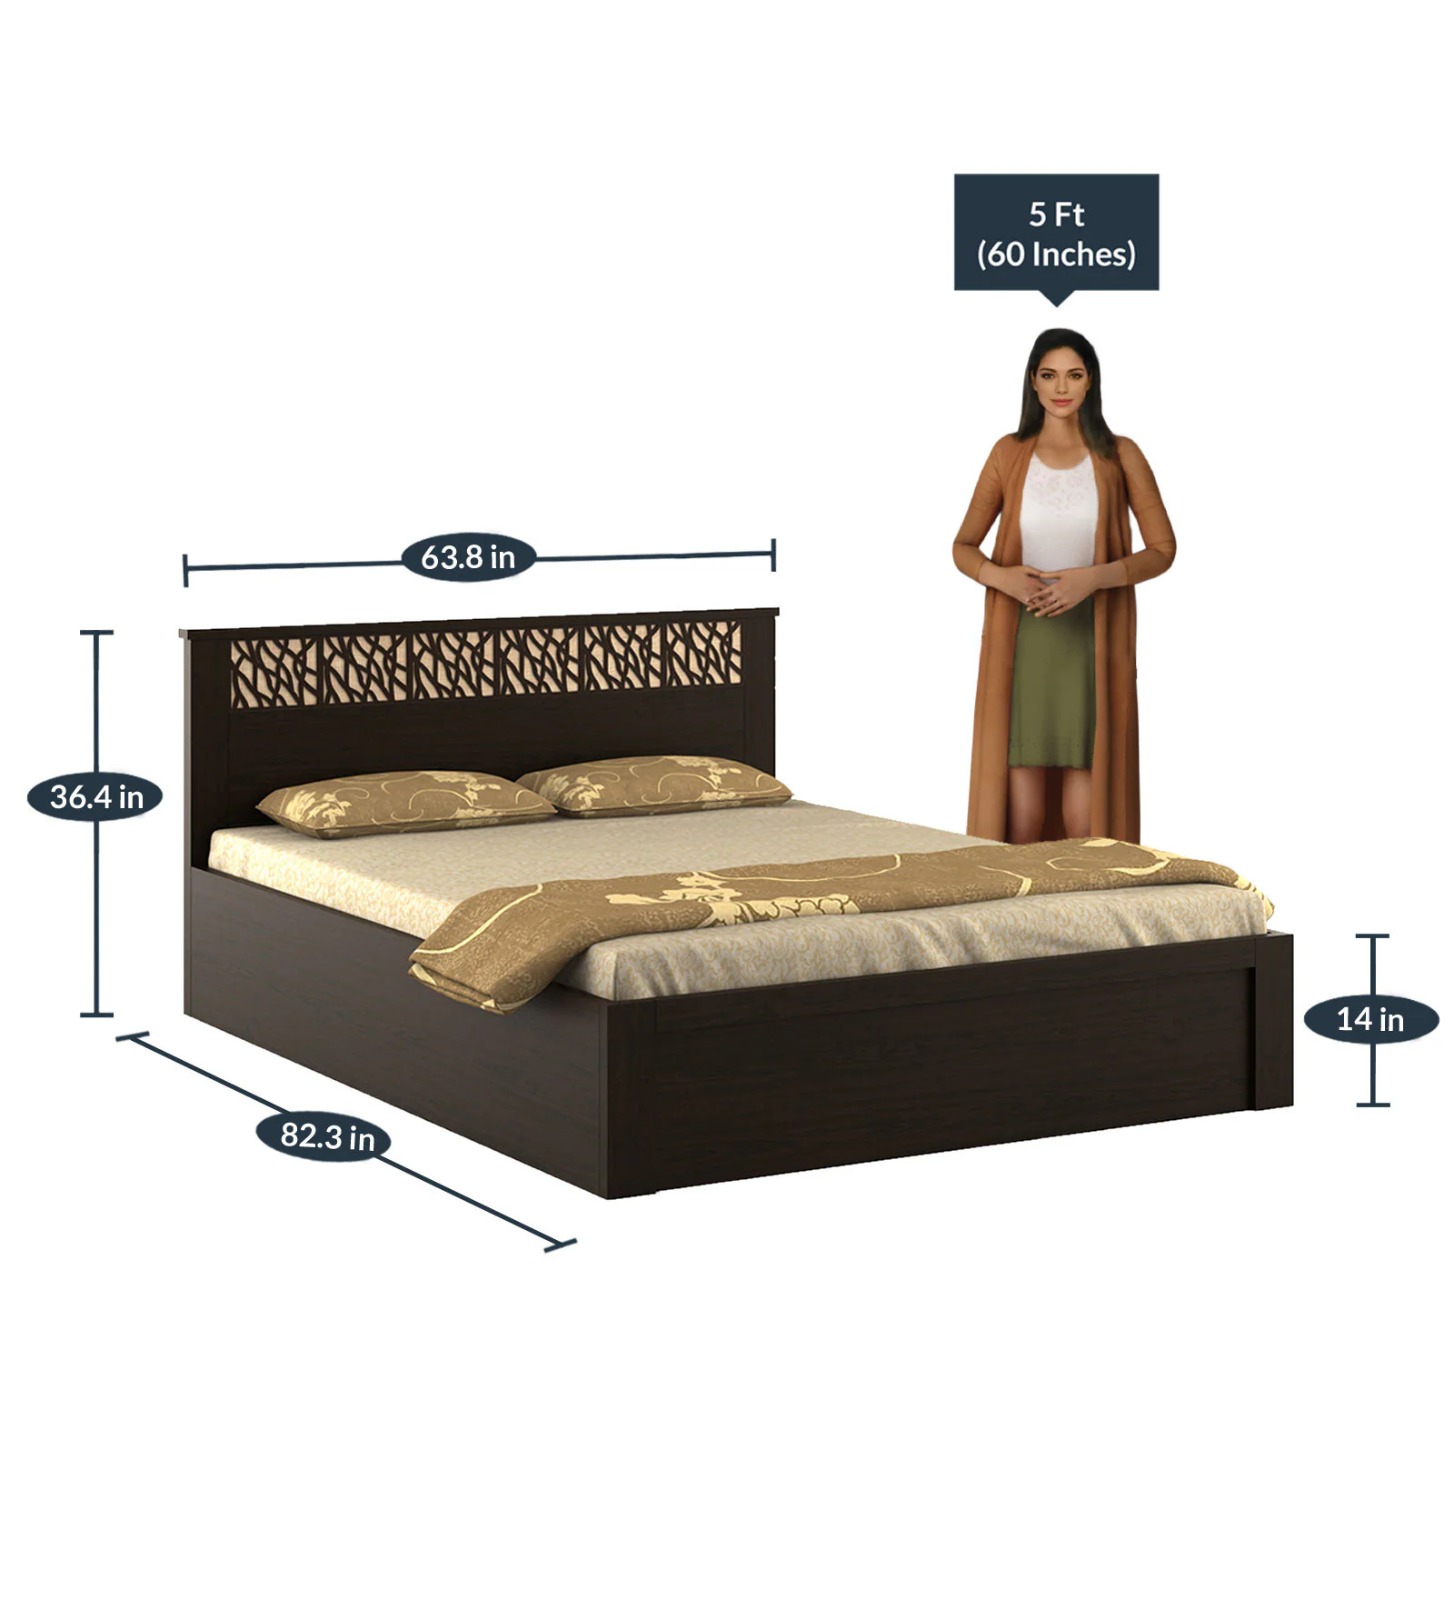  Buy Morgen King Size Bed In Vermont Finish With Box Storage up to 65%off